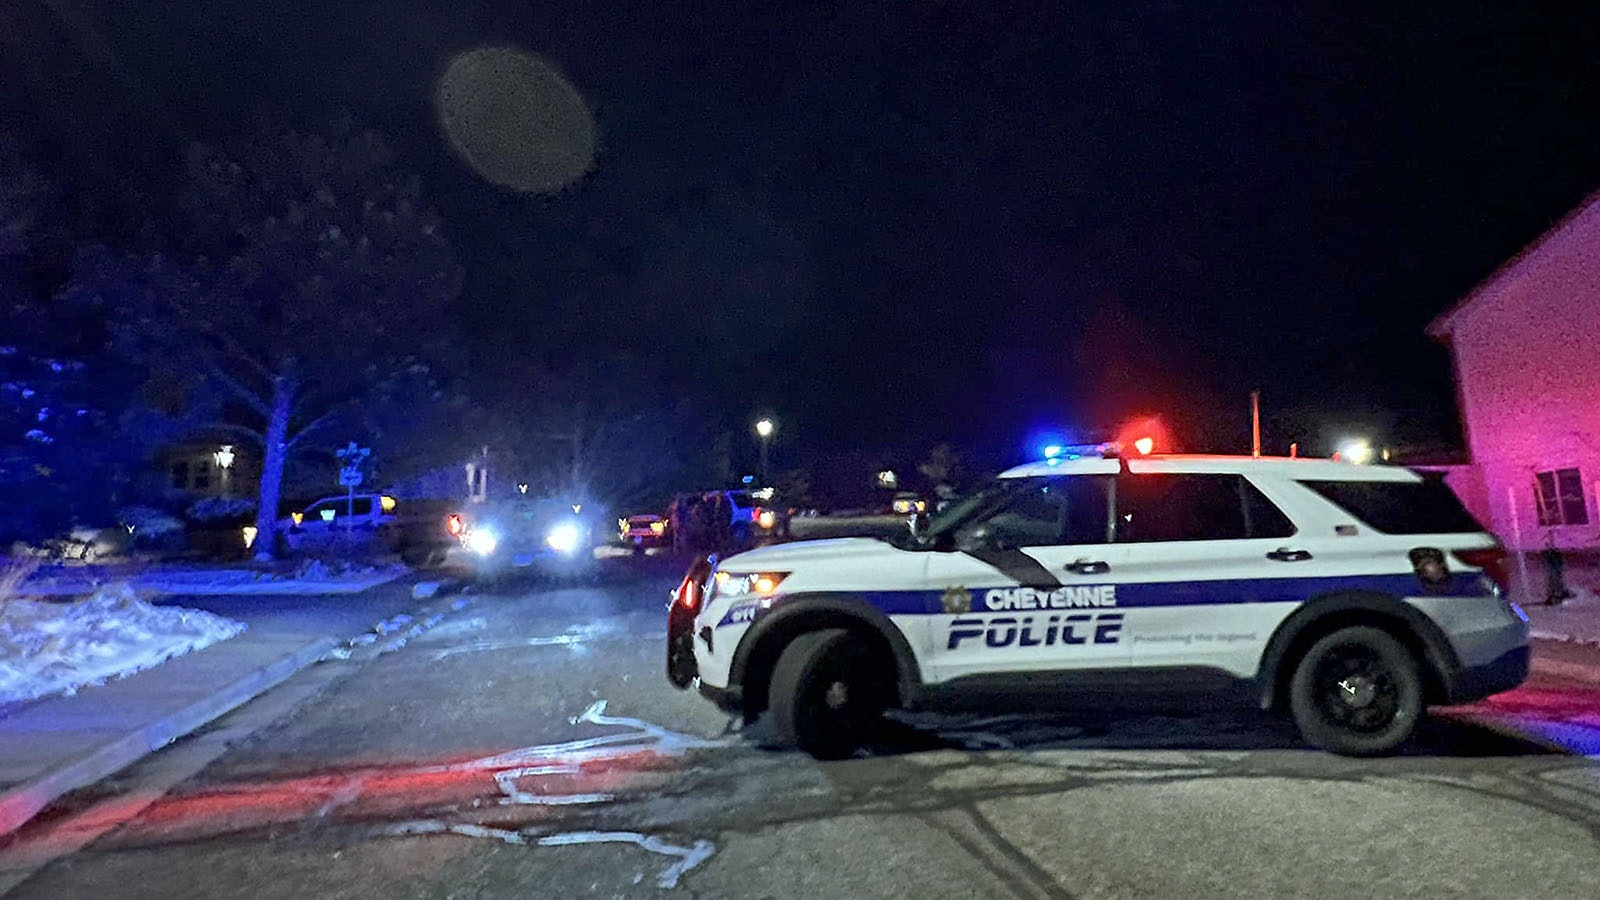 The Cheyenne Police Department responded in force to a domestic disturbance call Friday evening that resulted in an exchange of gunfire that killed the suspect. No officers were hurt.